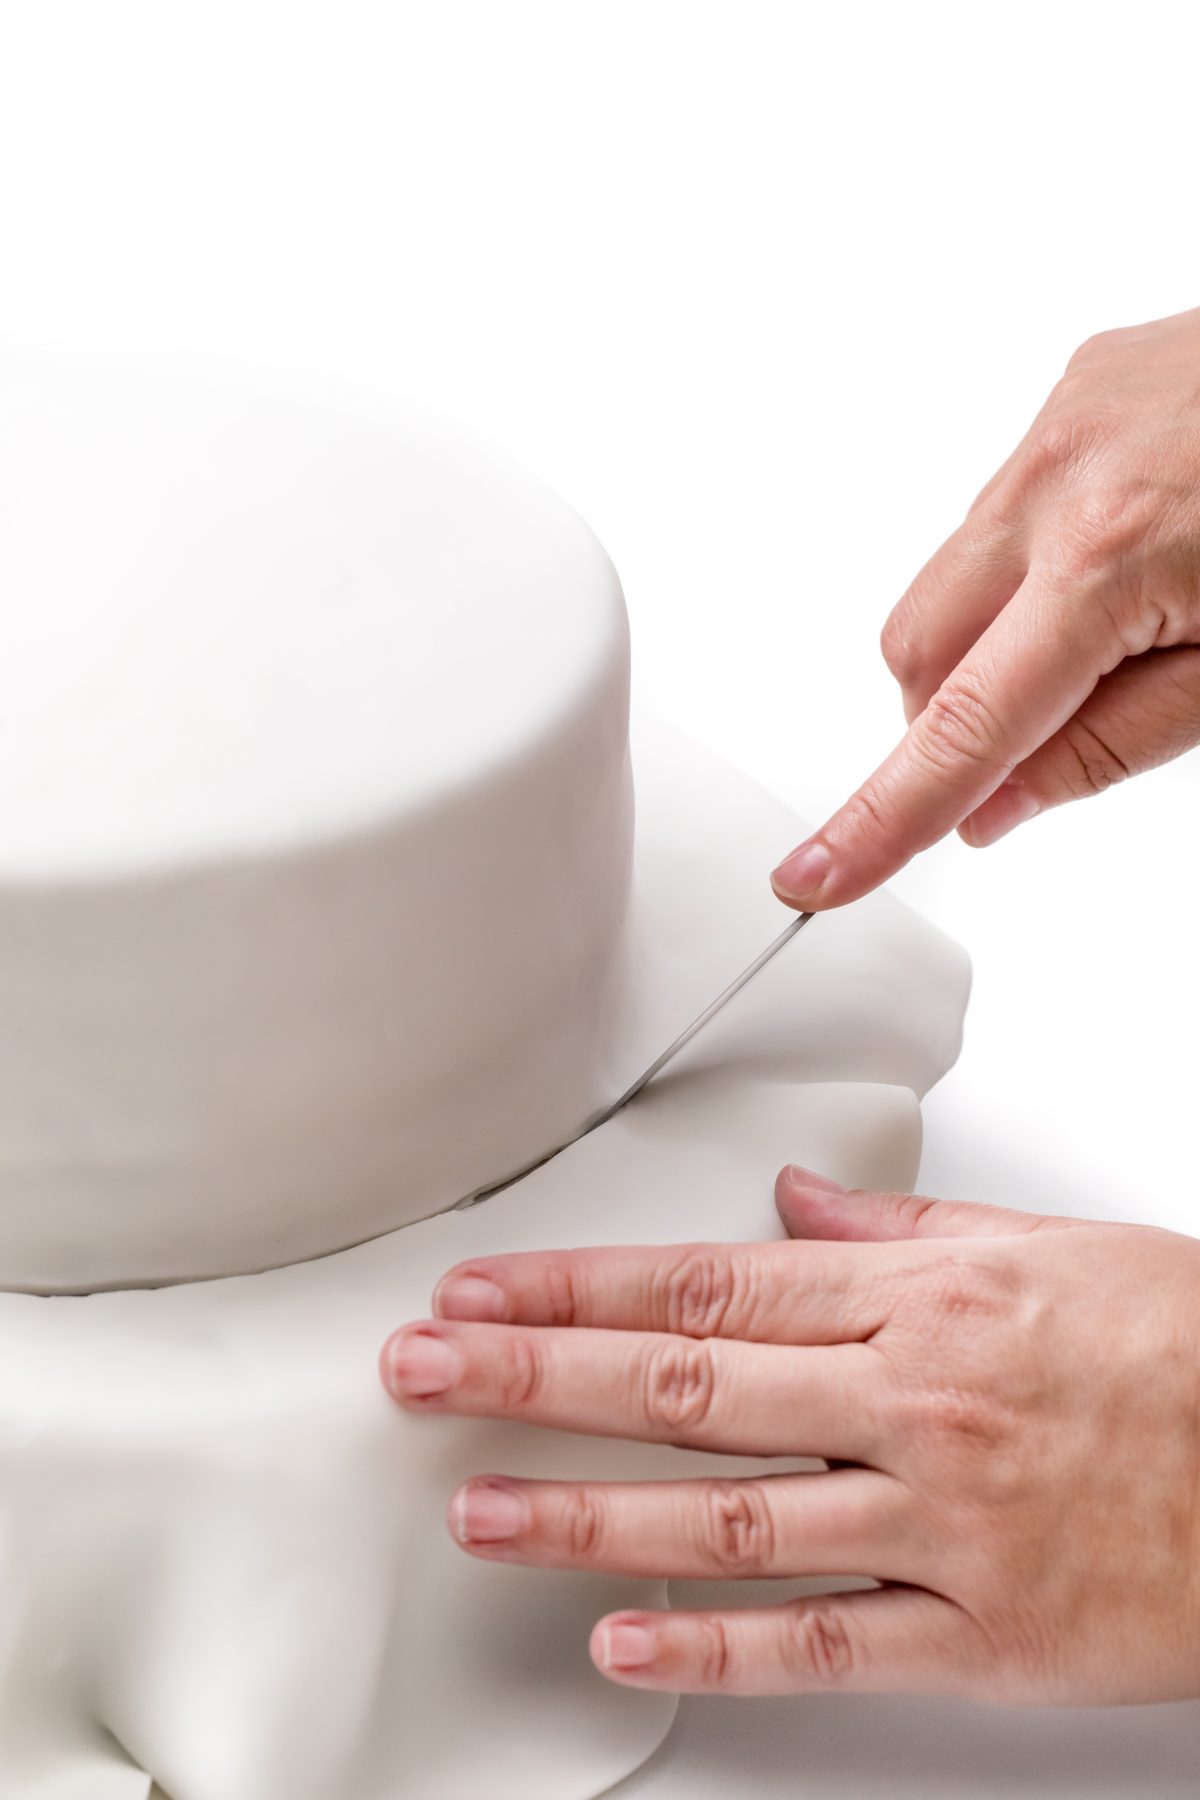 Cut excess fondant away from base of cake